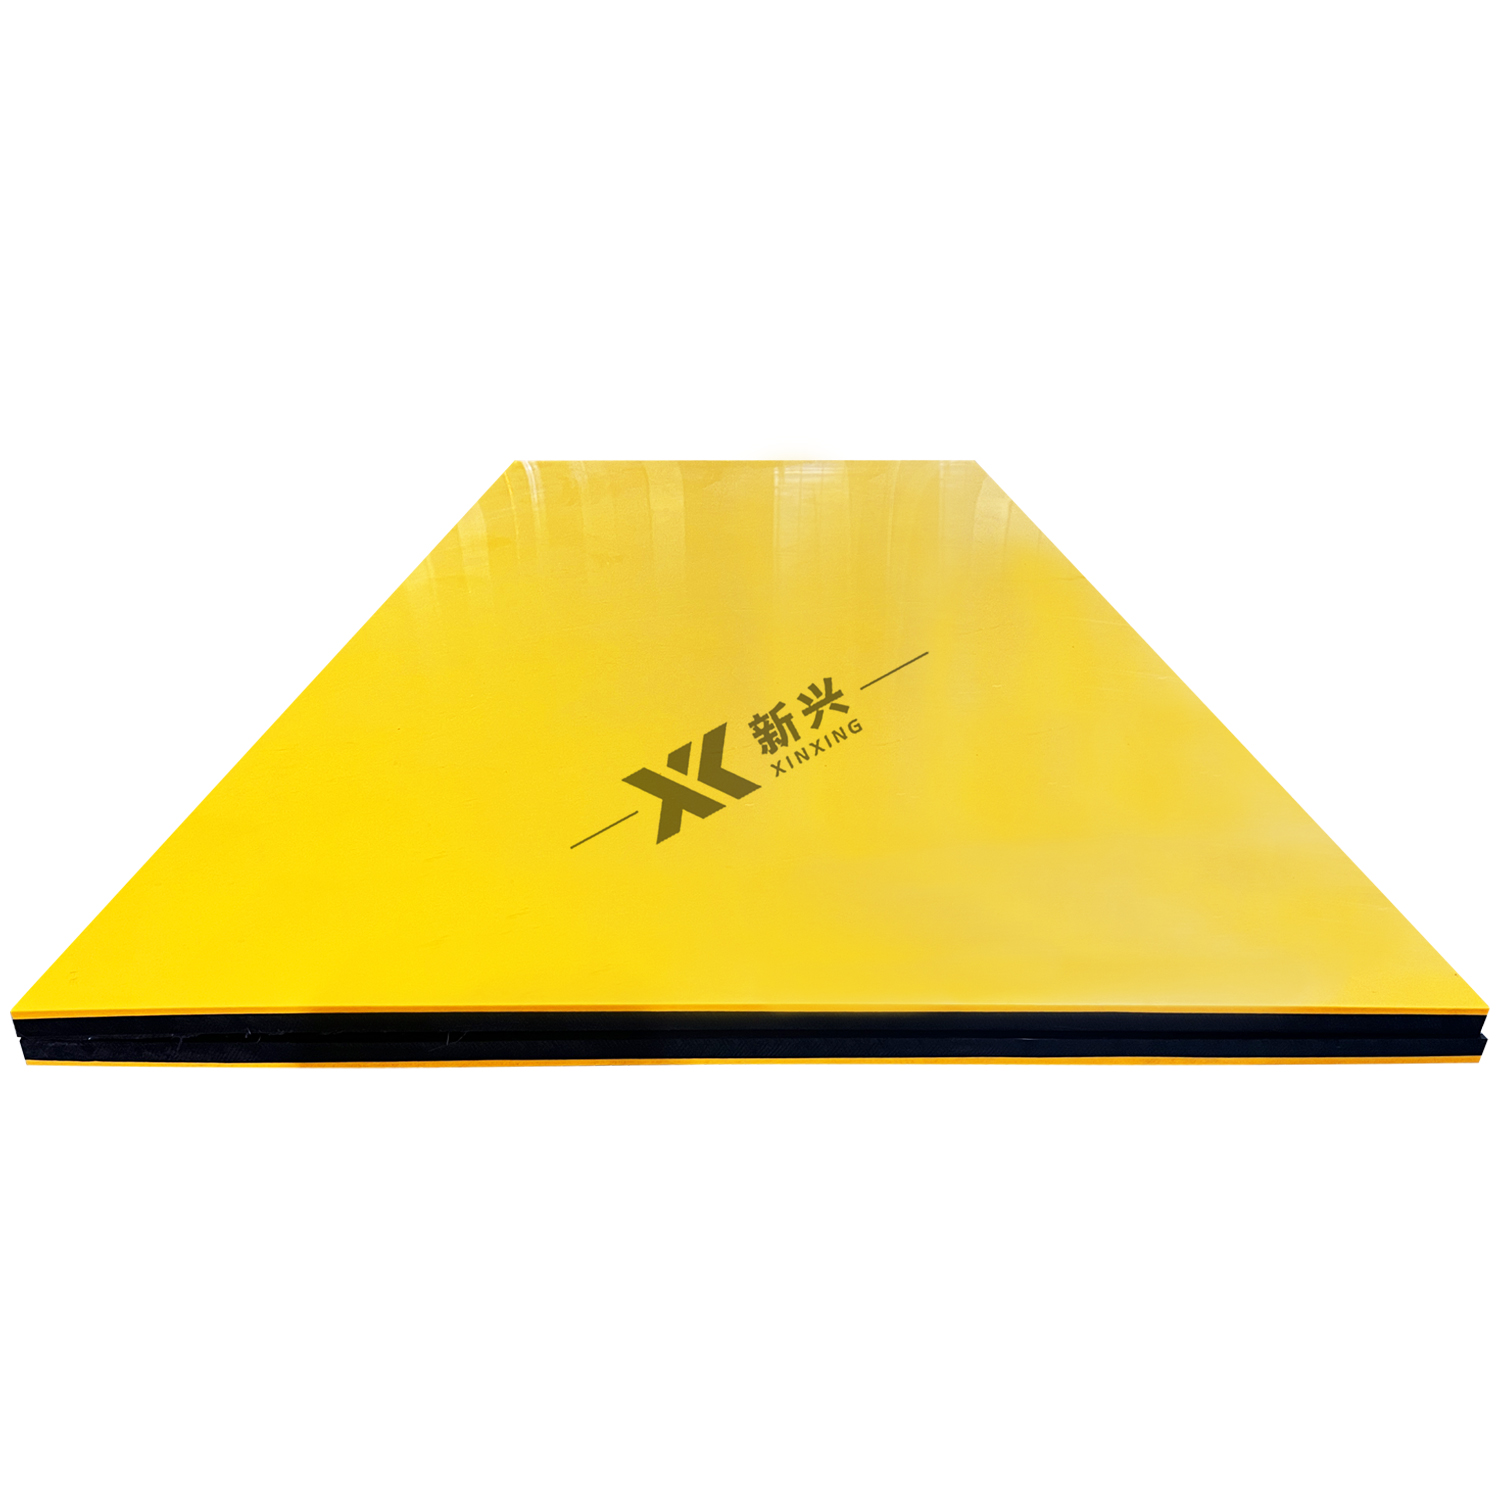 Sandwich Three Layer Hdpe Double Color Plastic Sheet Board Rough Surface Hdpe Sheet Supplier